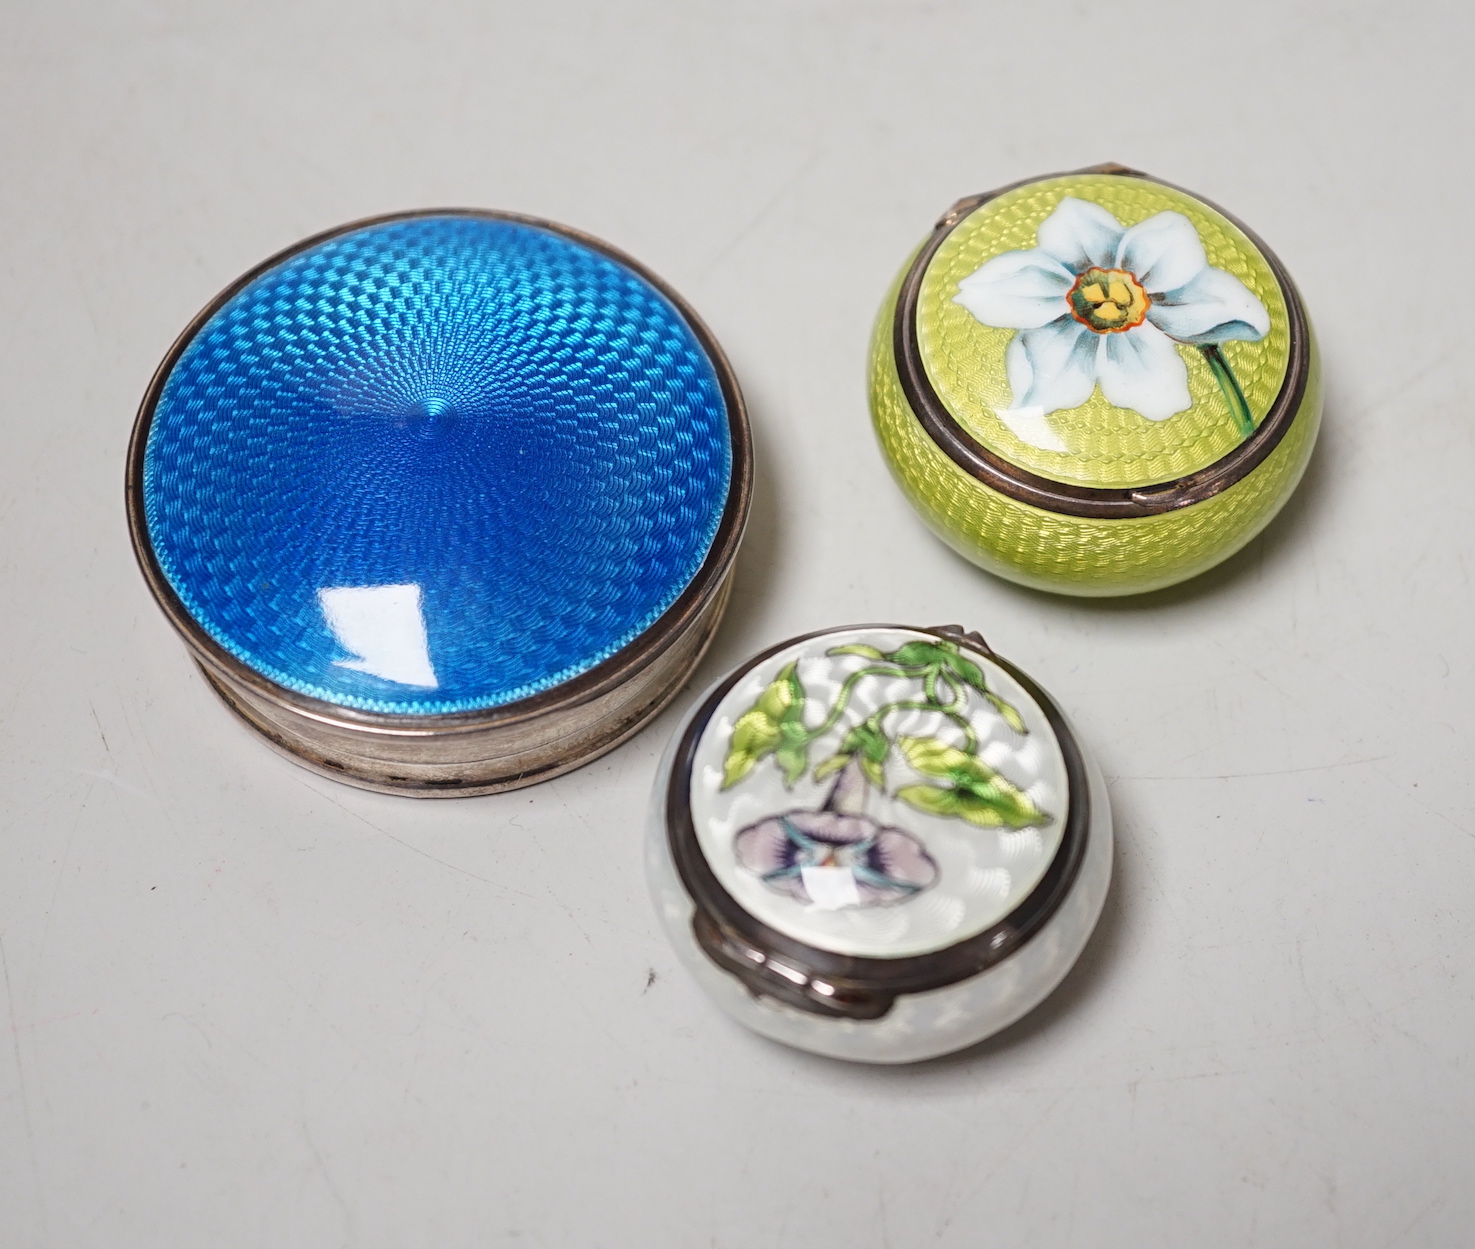 An Edwardian Art Nouveau silver and enamel pill box, import marks for London, 1901, one other 900 standard and enamel pill box and silver and enamel compact, largest 52mm.